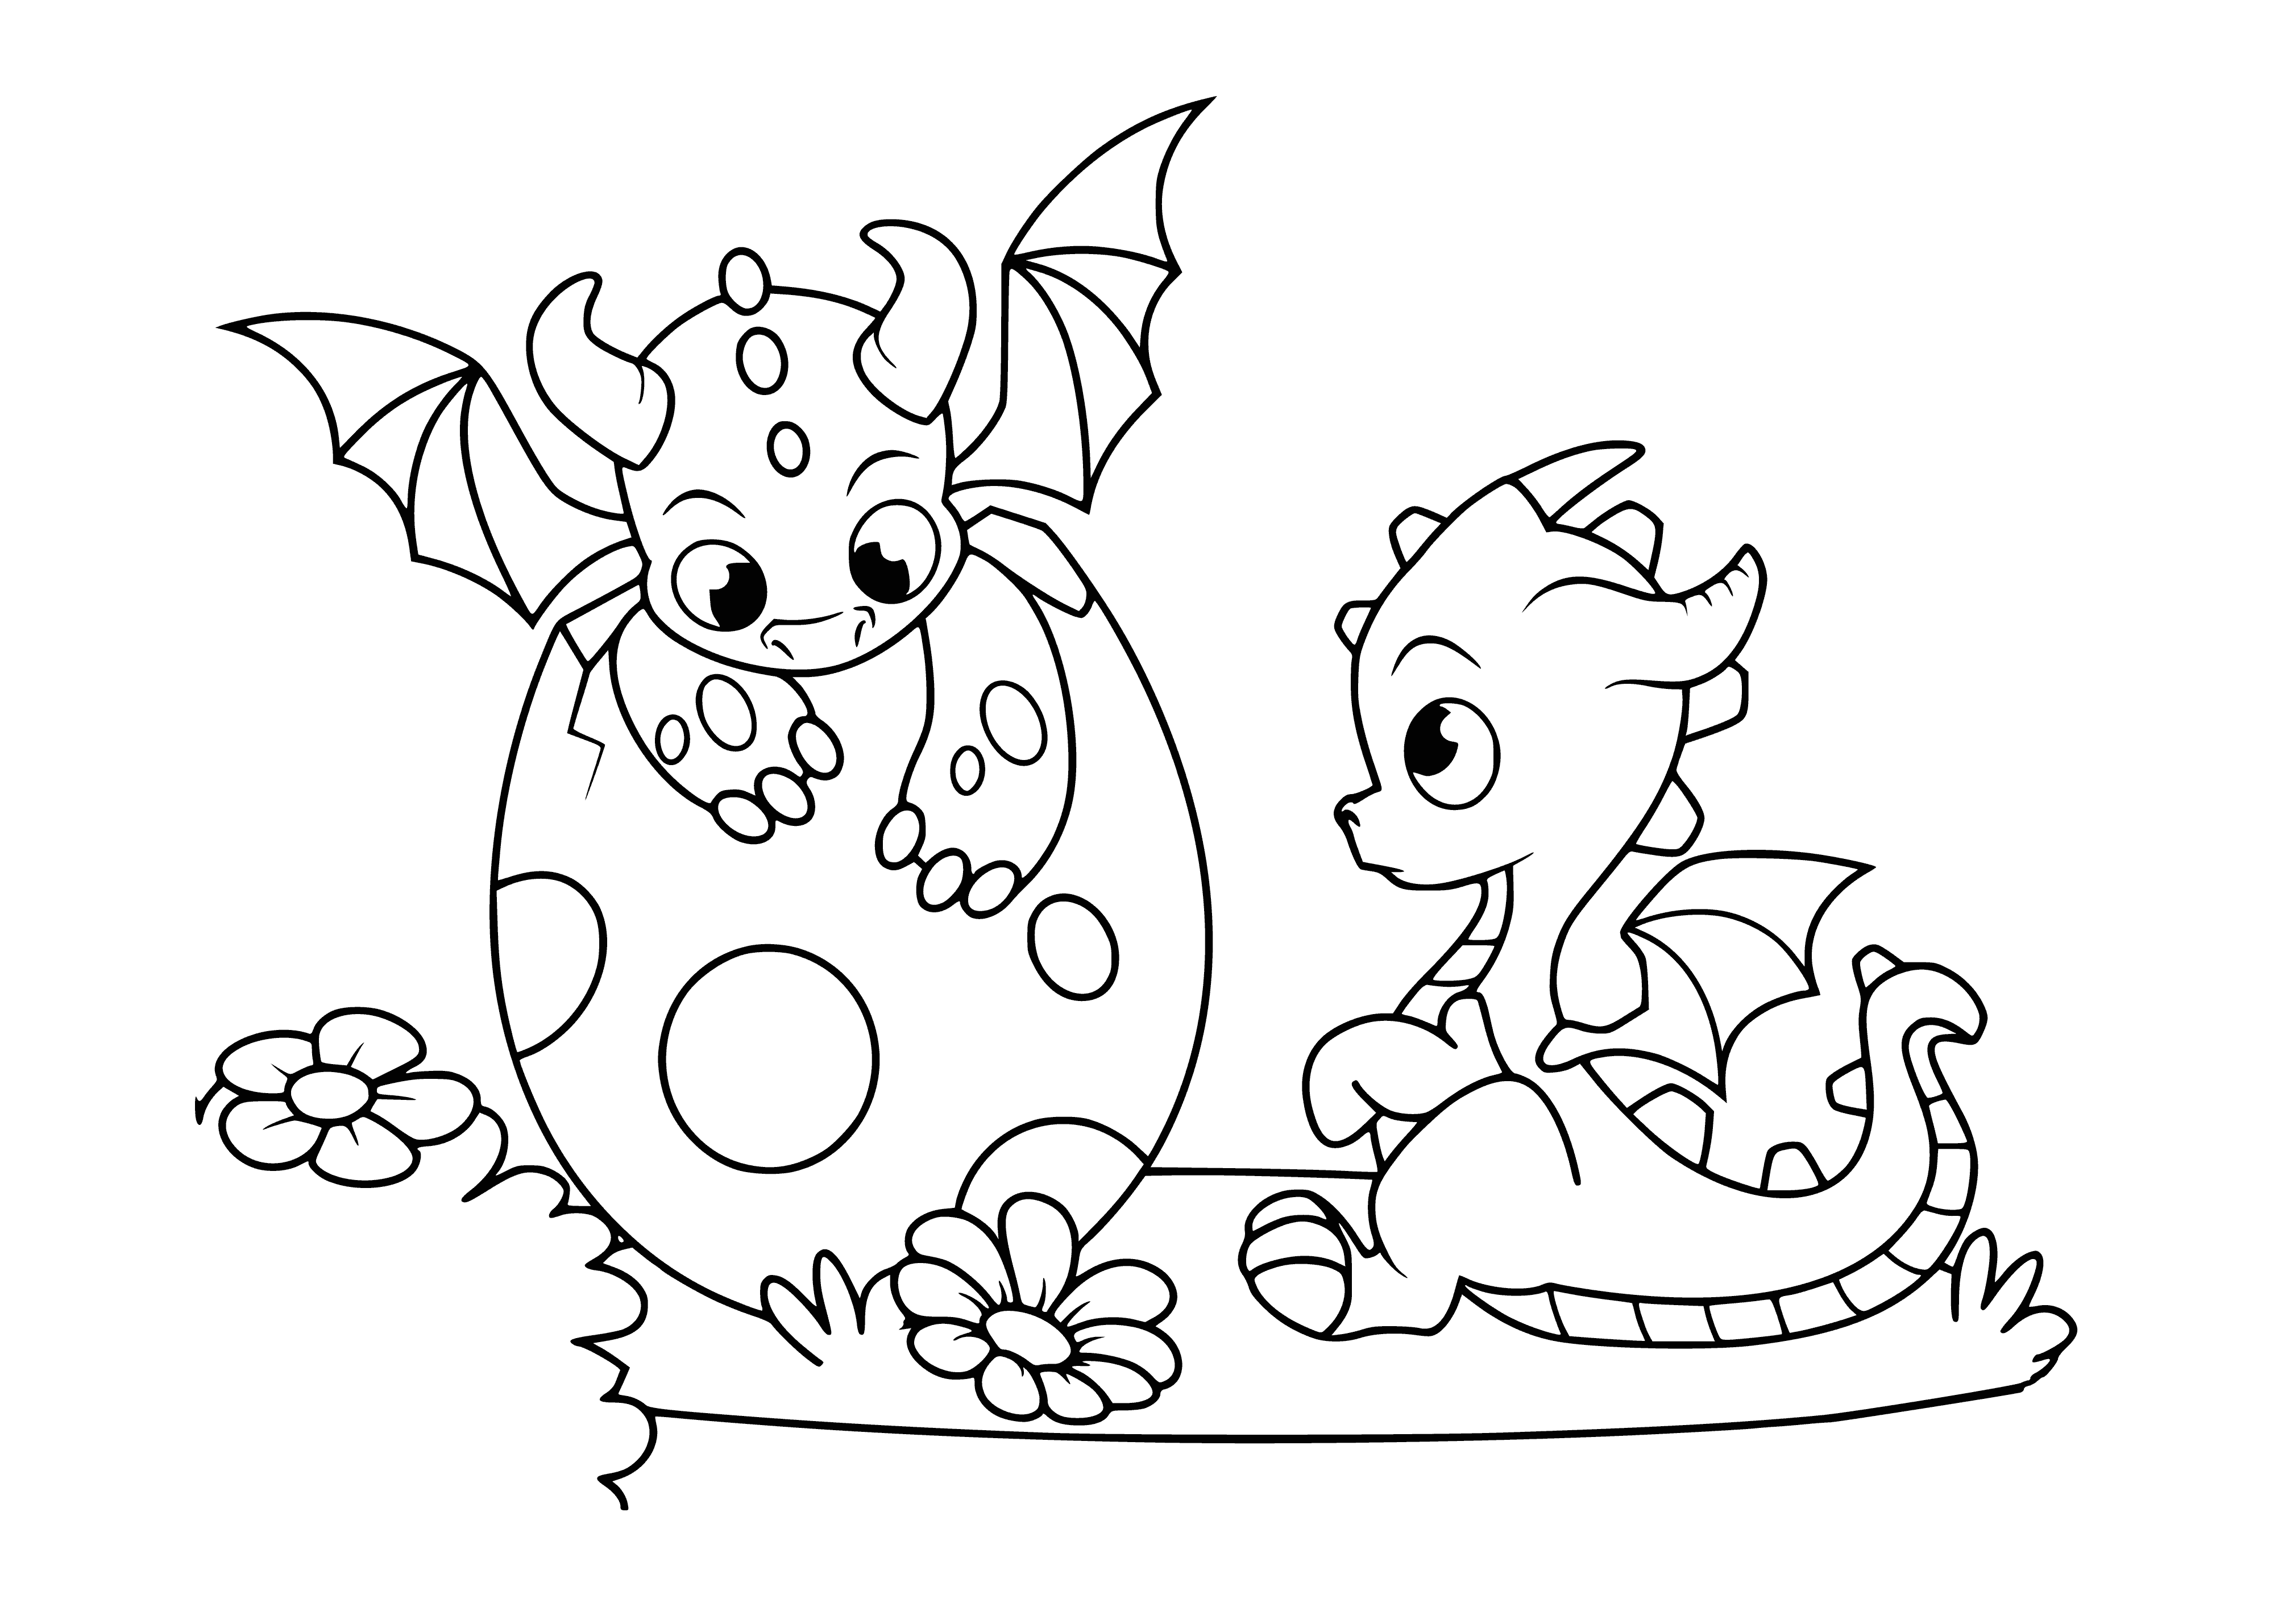 coloring page: Two green dragons, one flying and one sitting on a rock, w/ spikes and long tails. #coloringpage